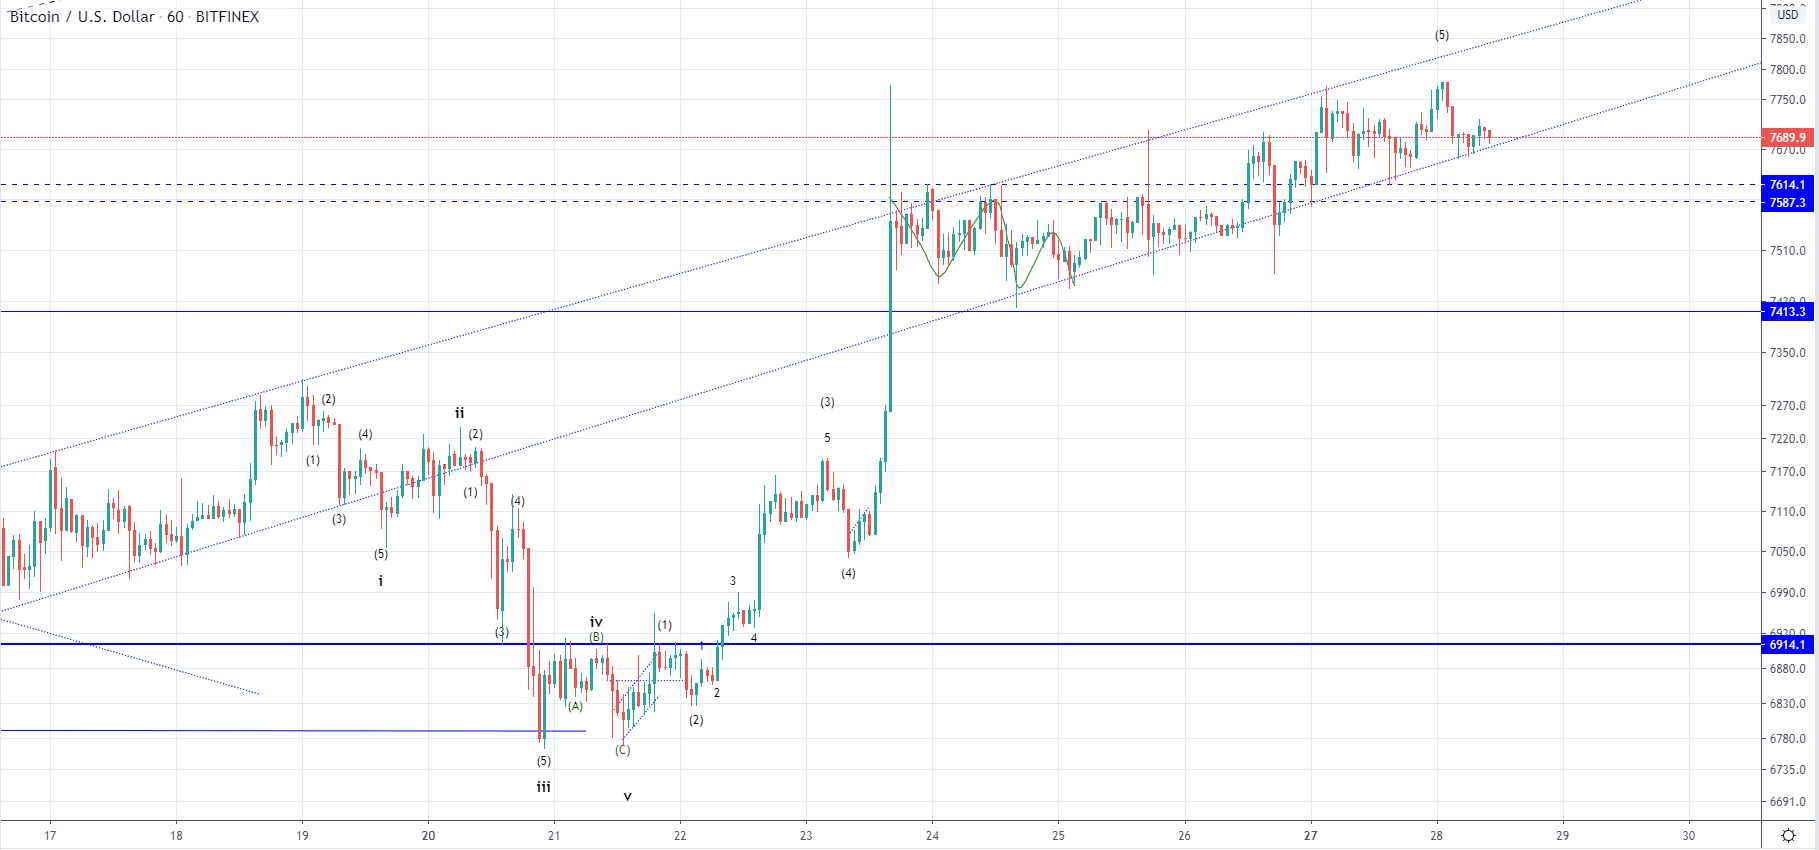 BTC and XRP - Ascending Channel Near A Breakout